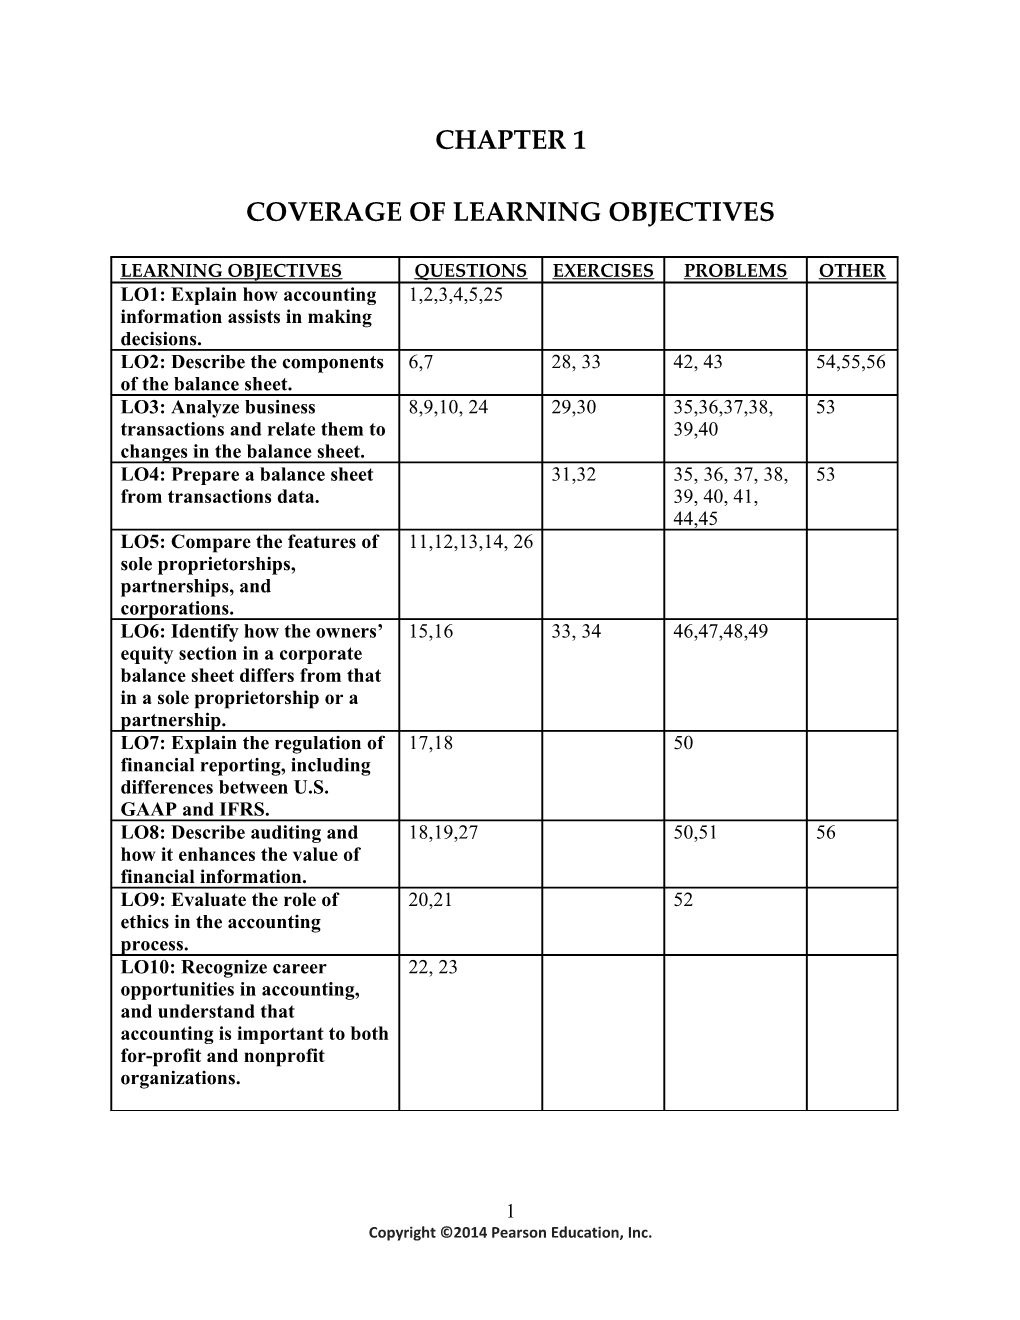 Coverage of Learning Objectives